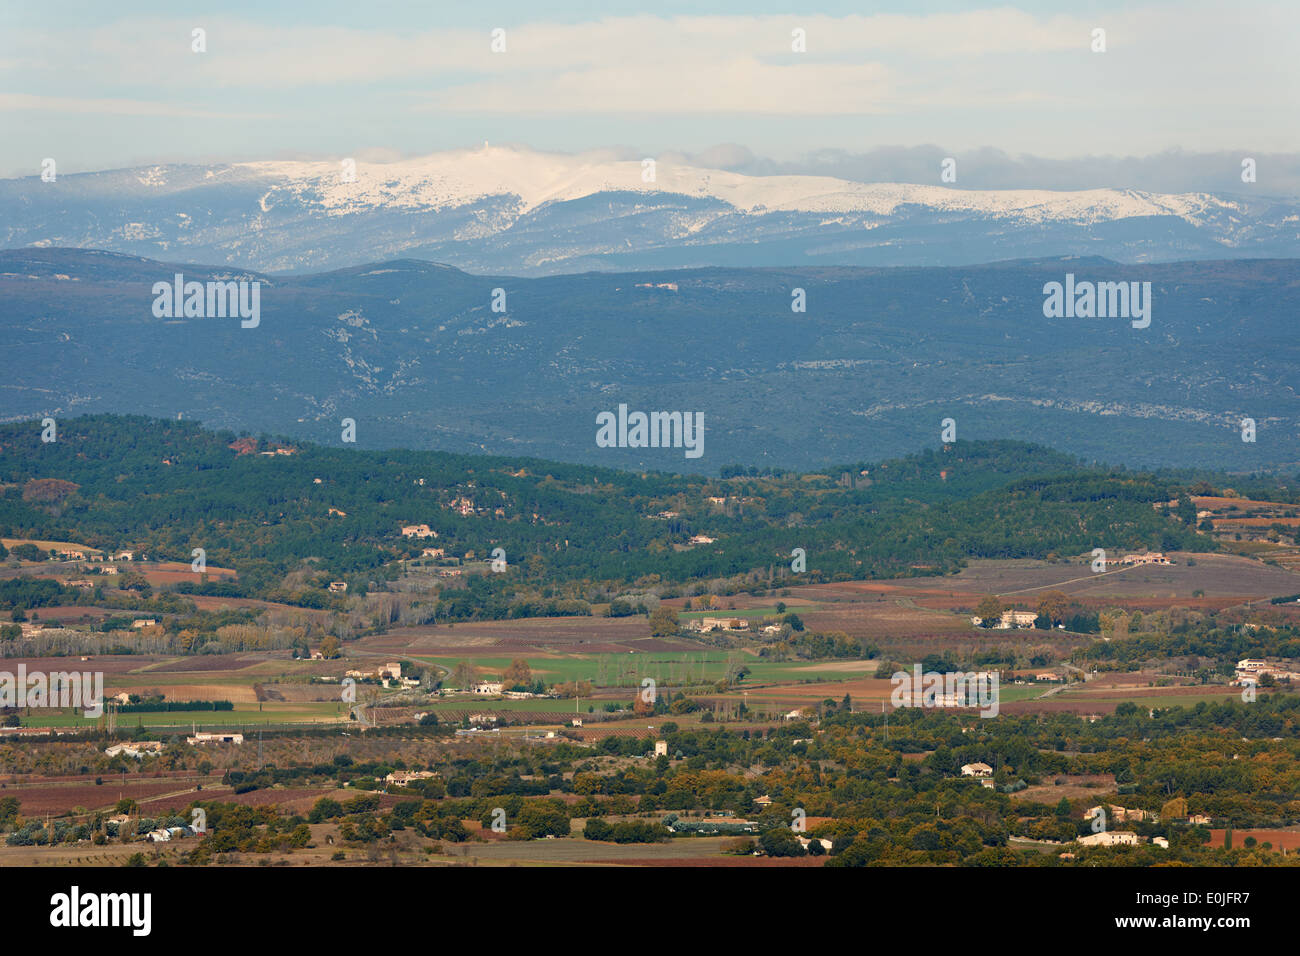 General landscape view from Luberon region with snow ridges of Alpes, Provence, France in winter season Stock Photo